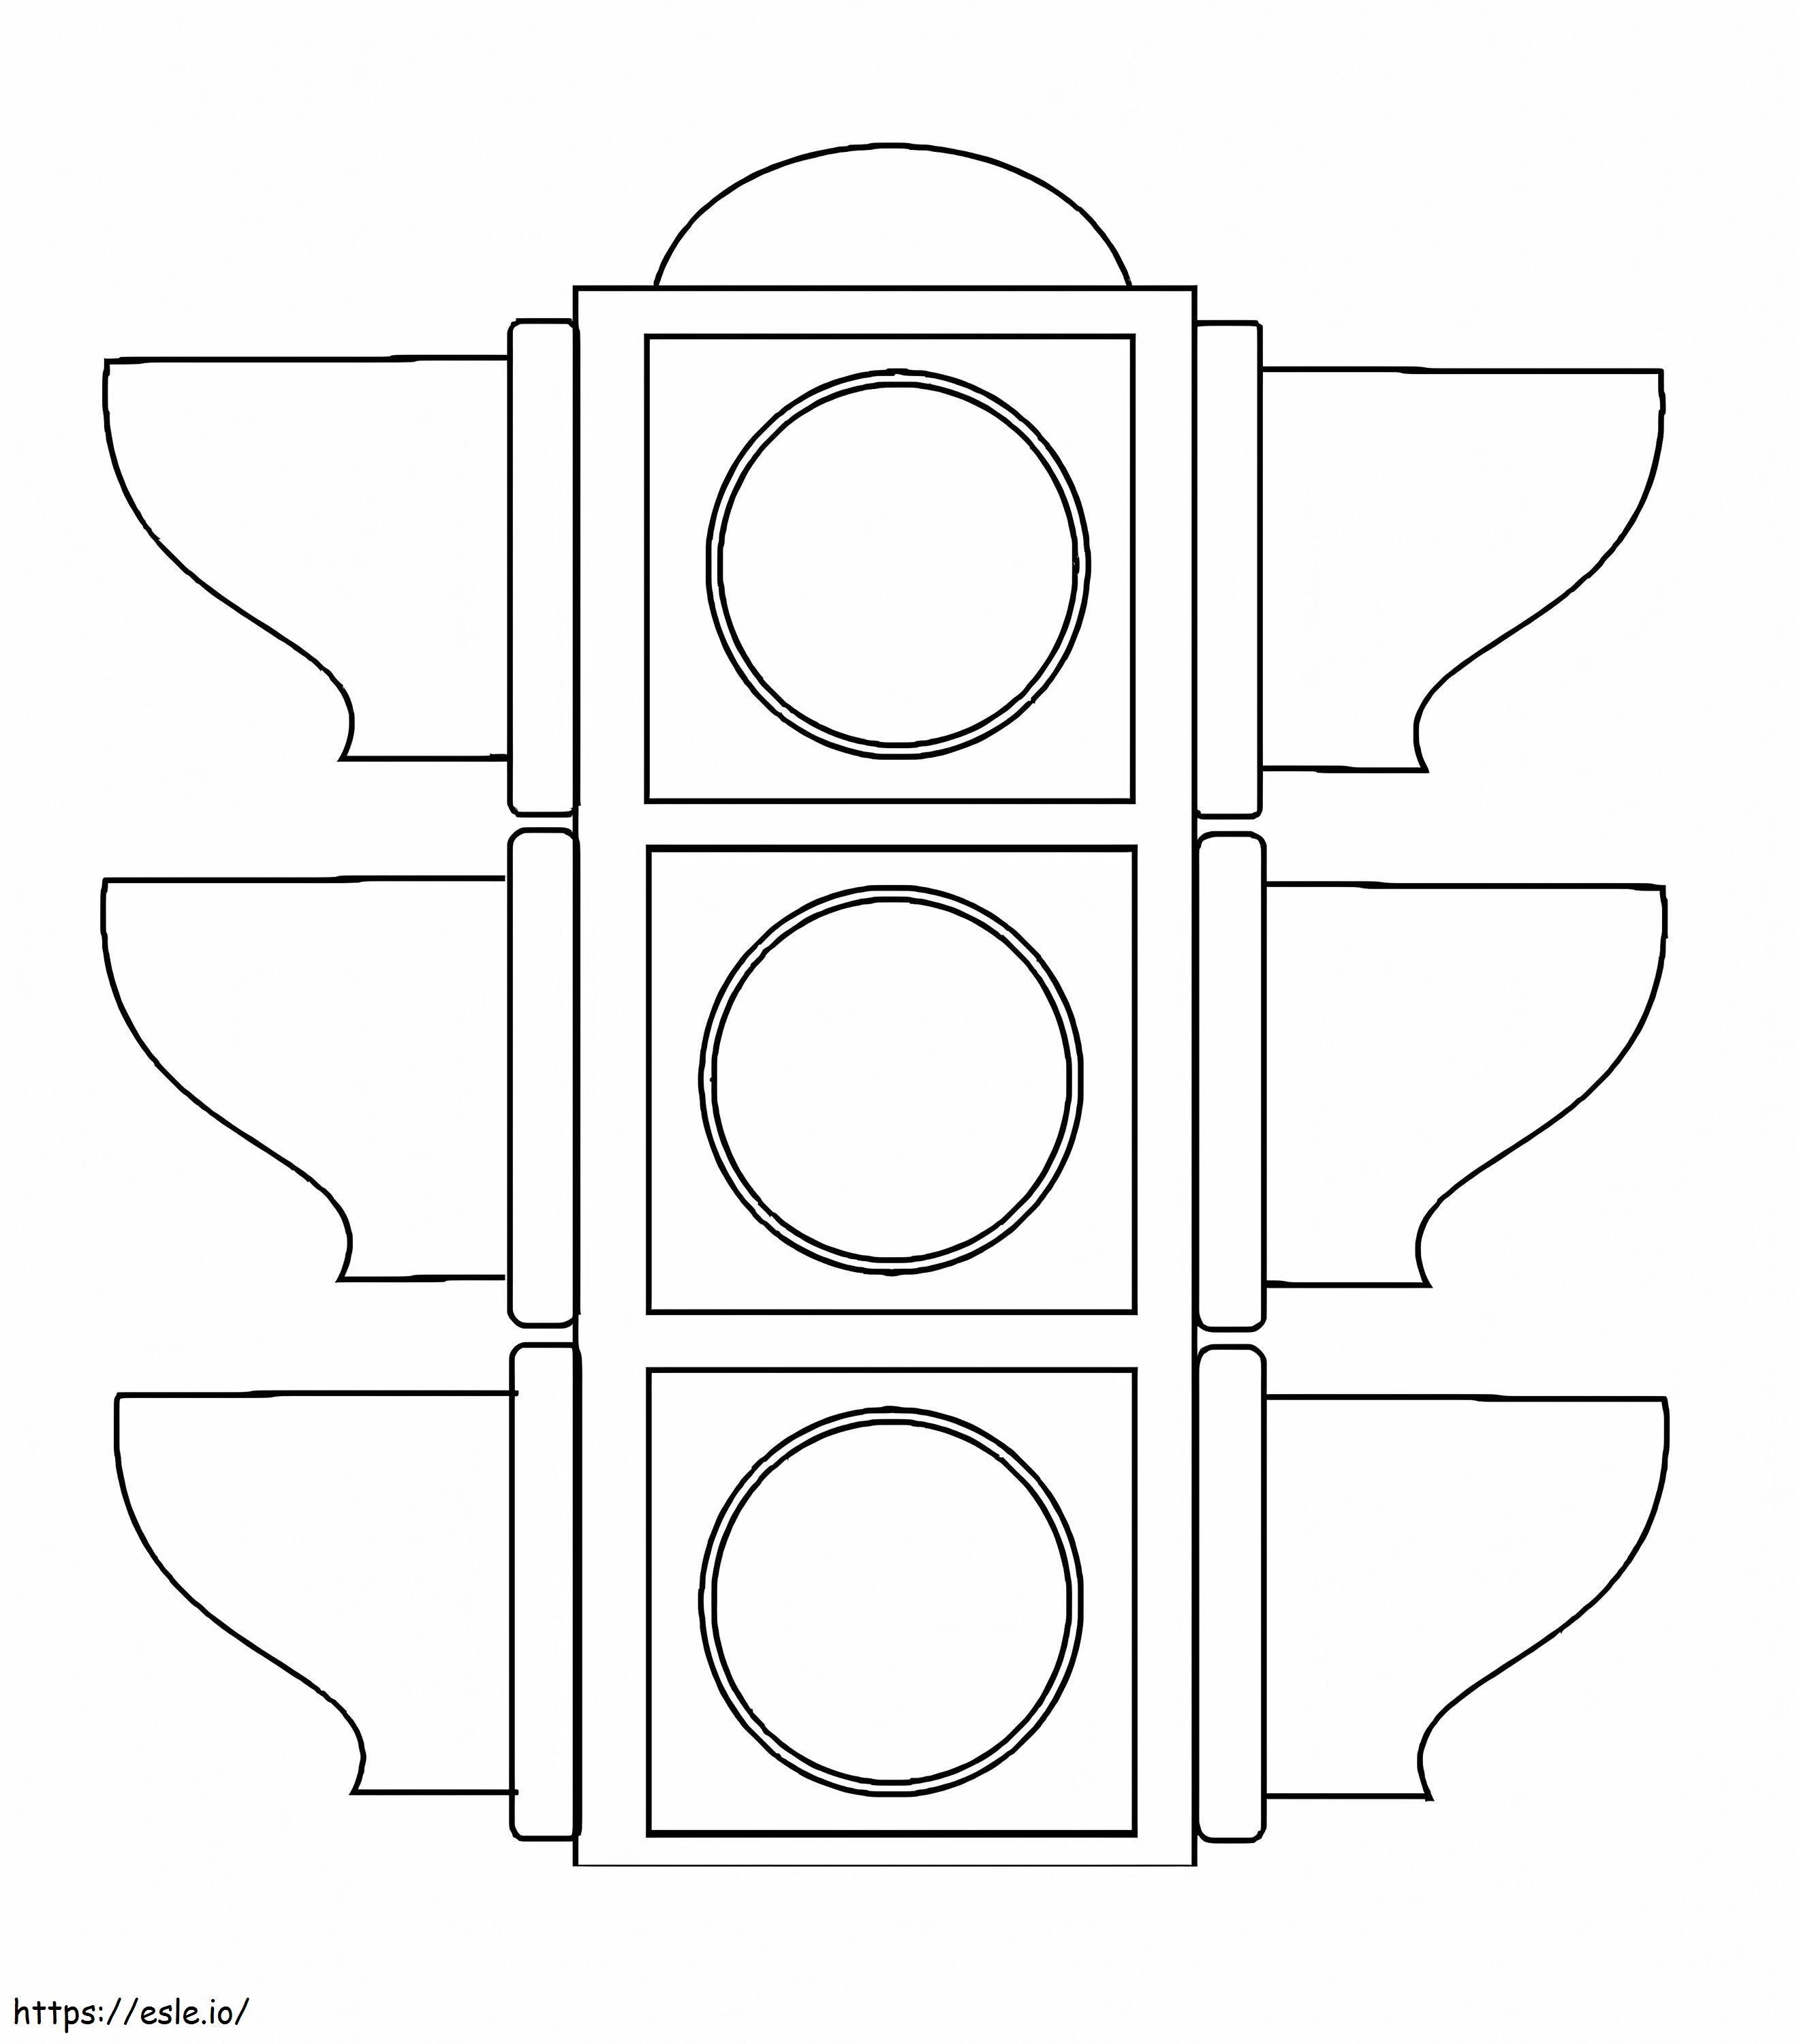 Perfect Traffic Light coloring page